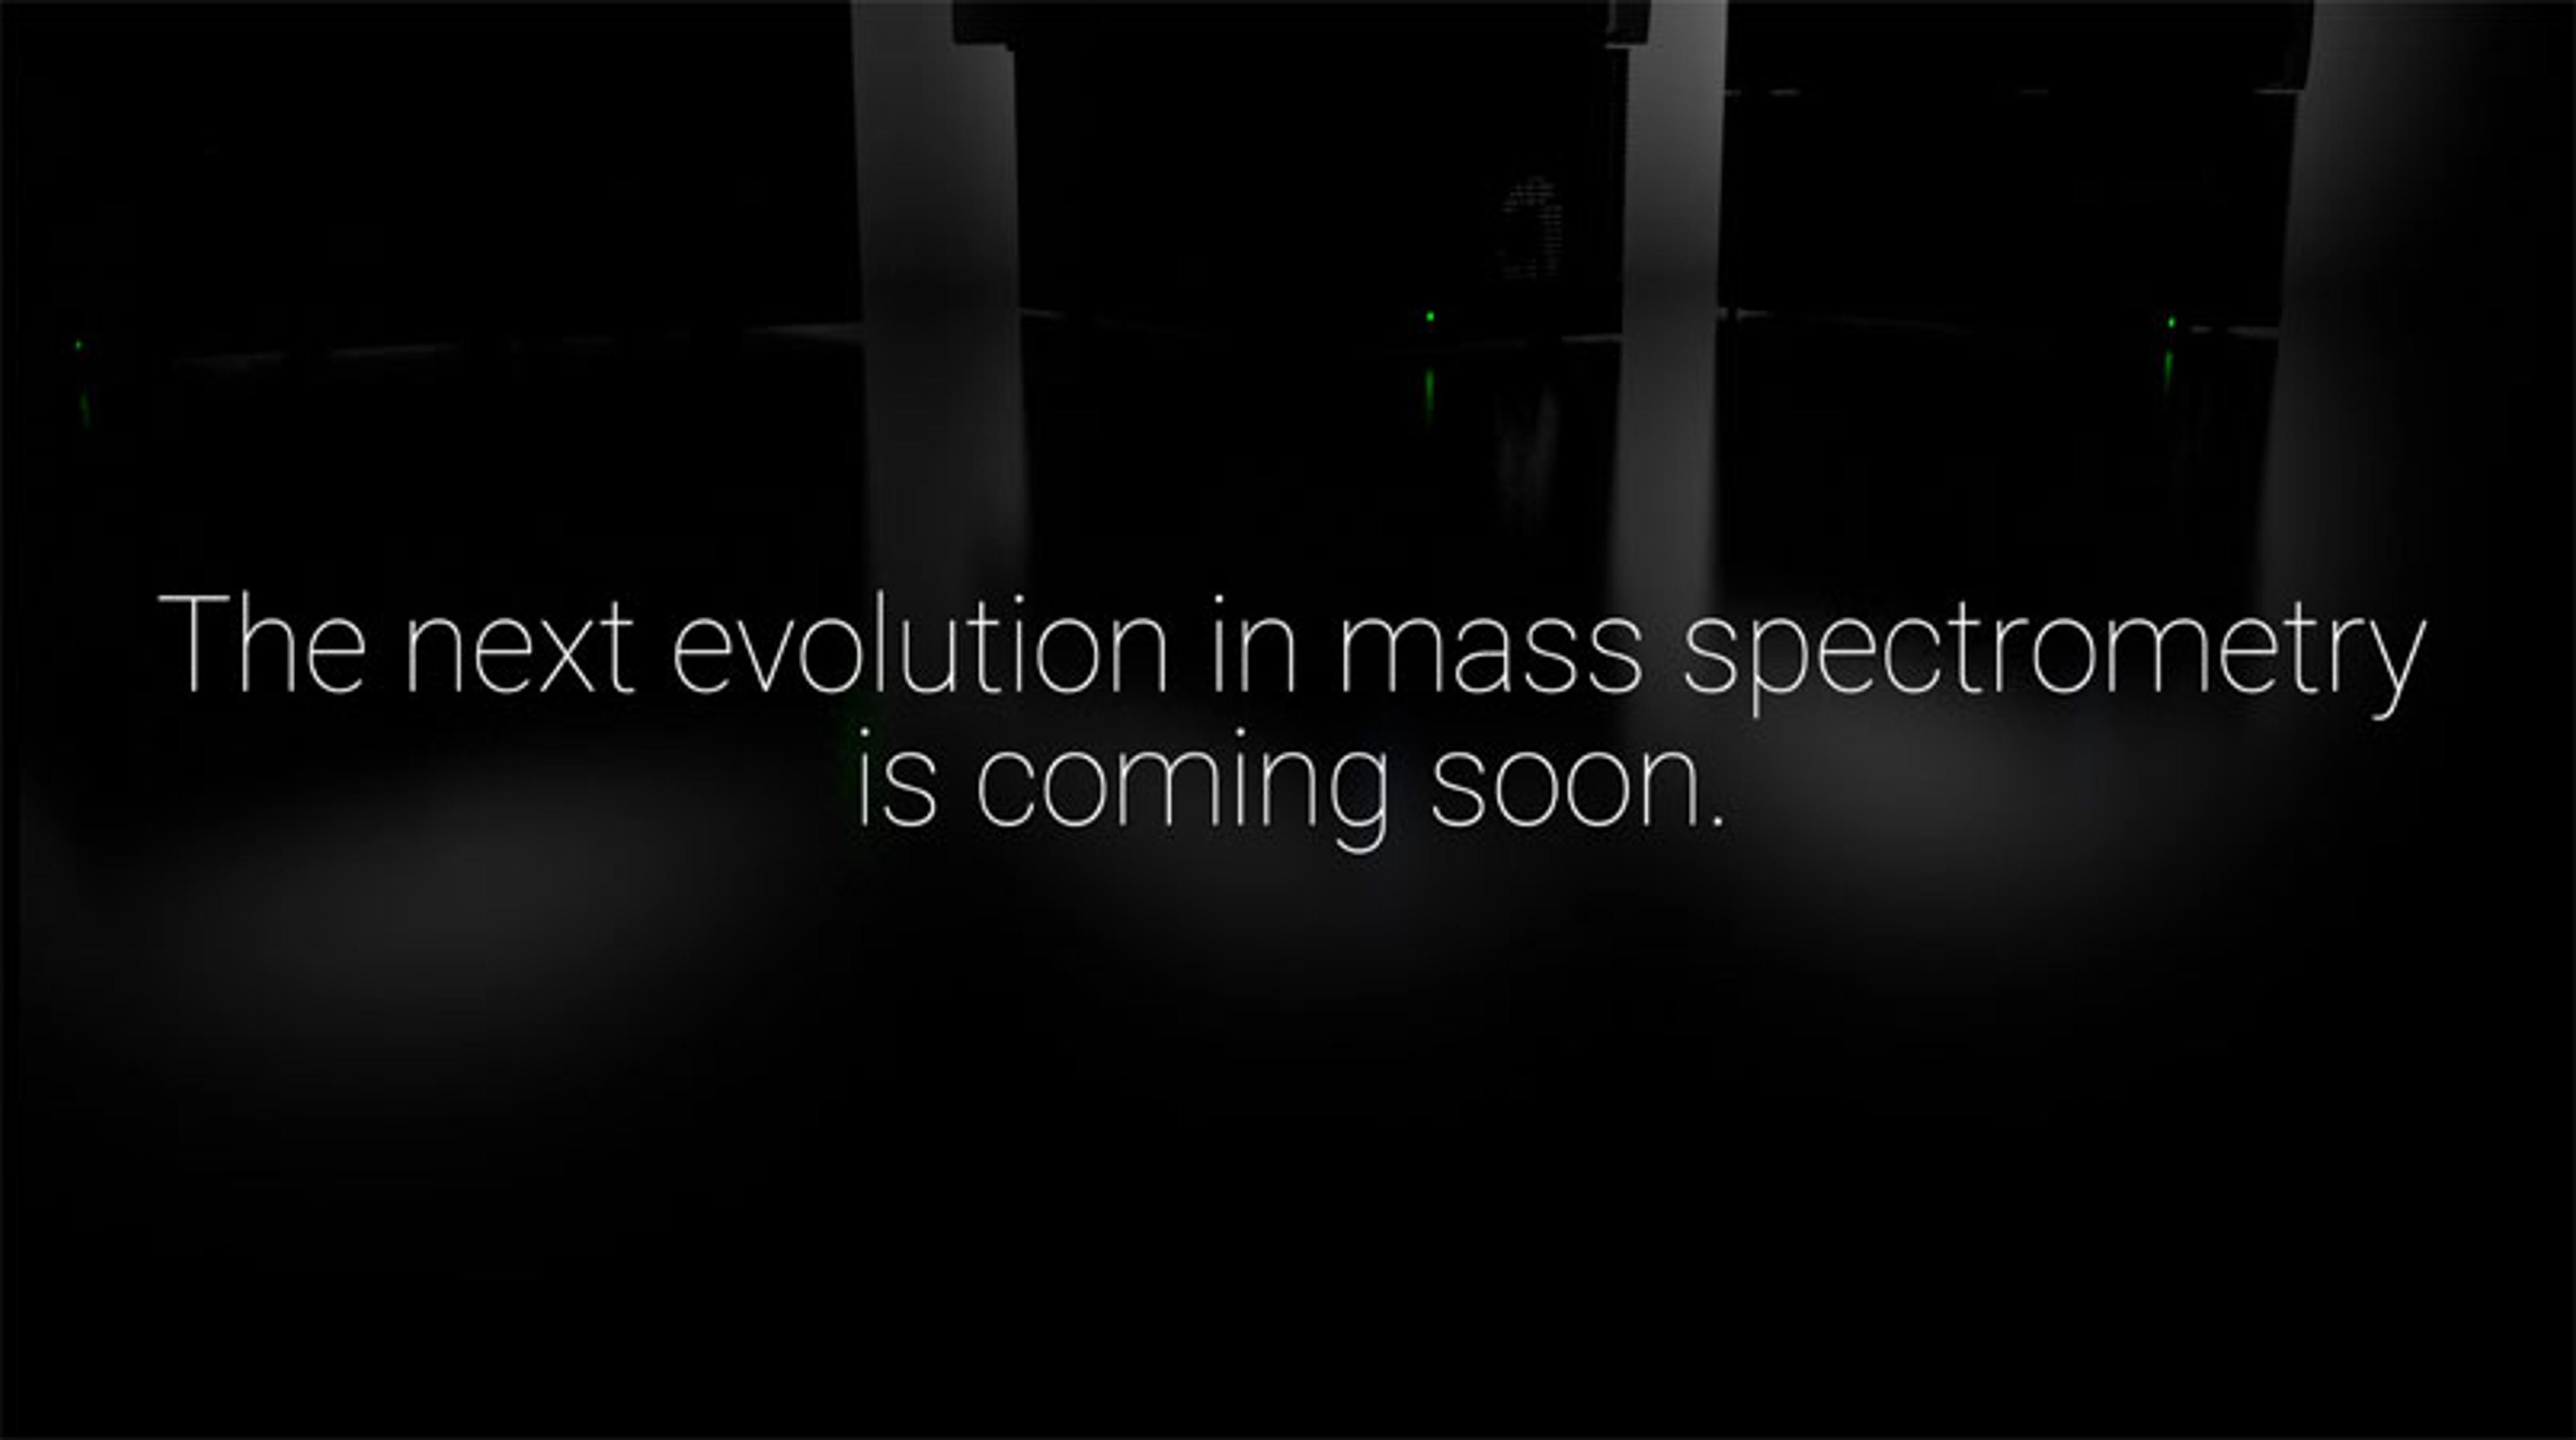 The next evolution in mass spectrometry is coming